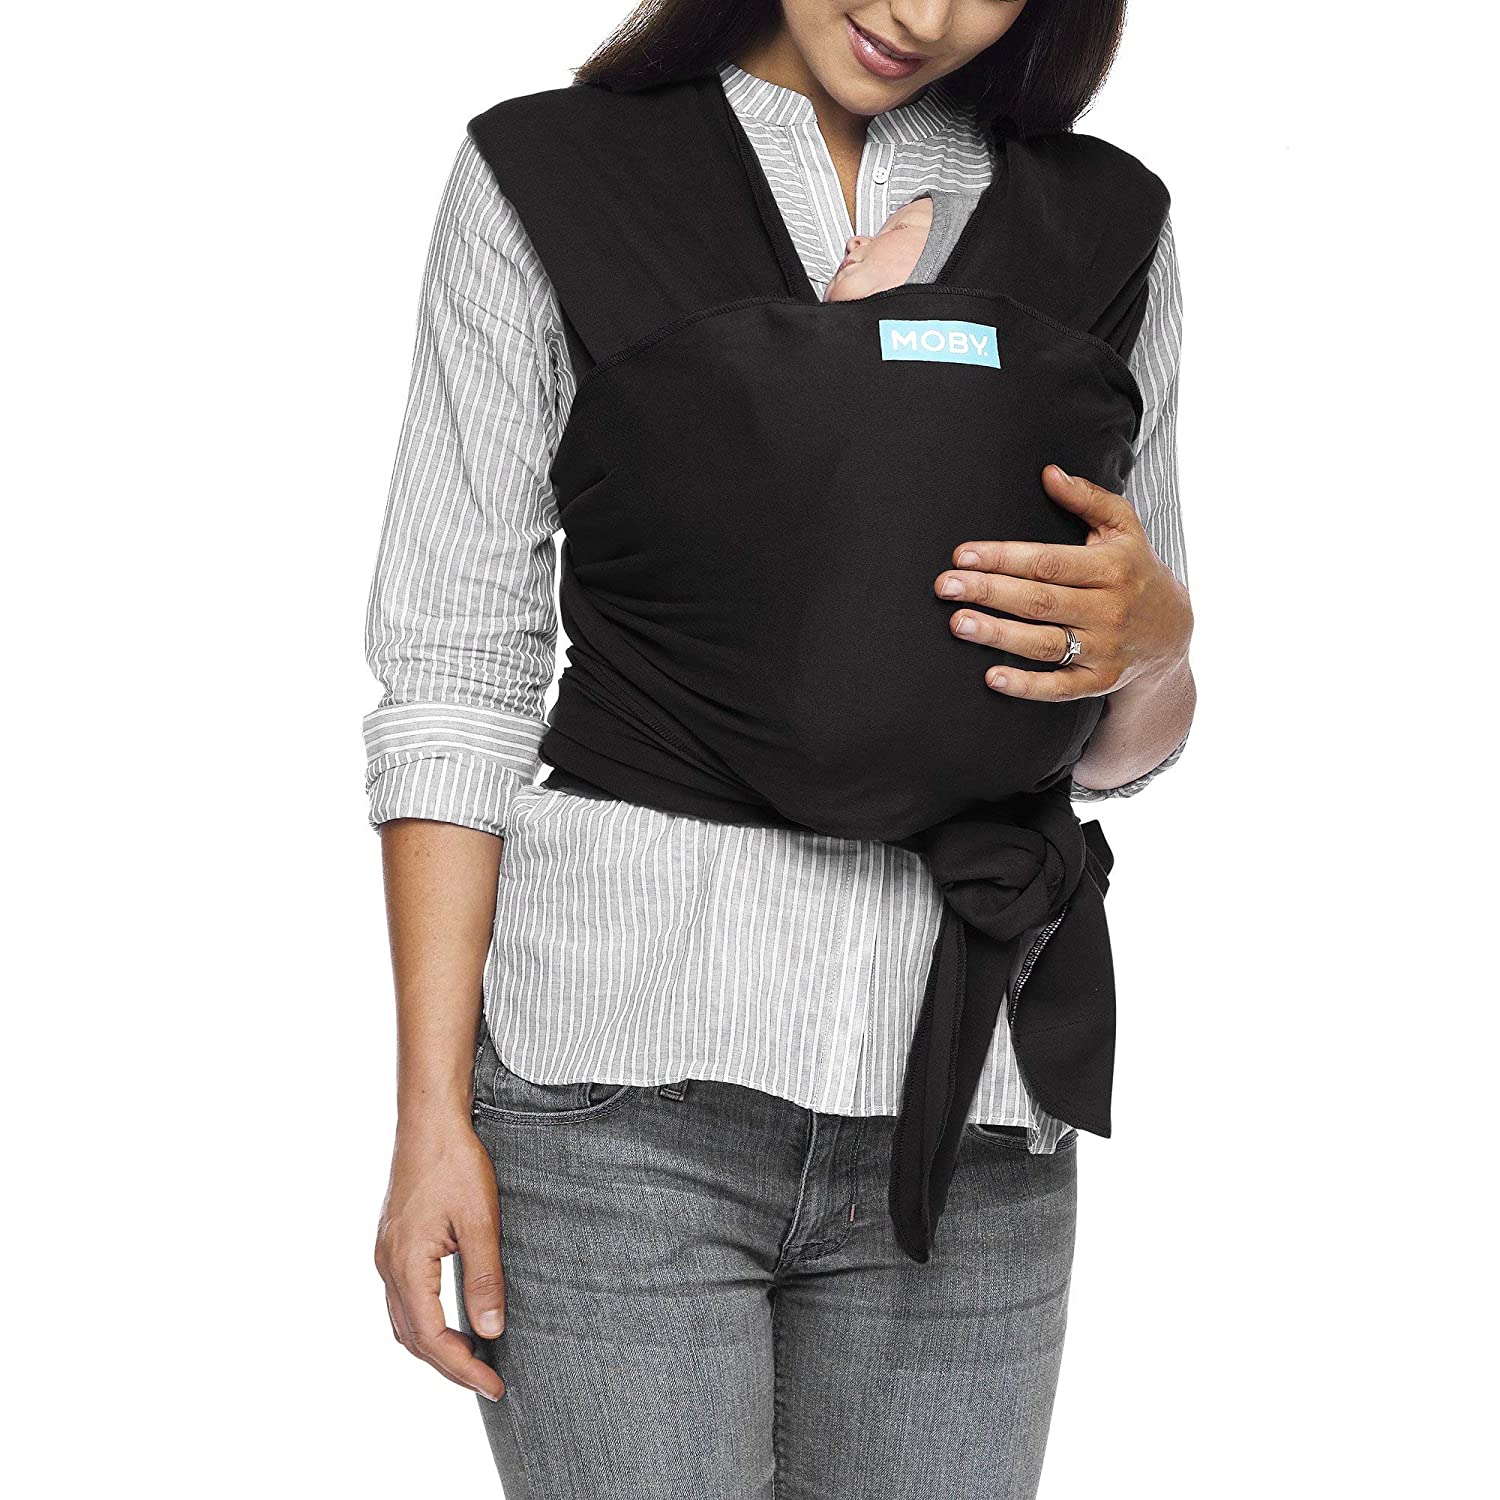 Baby Wearing Wrap for Parents On The Go - Baby Carrier for Newborn